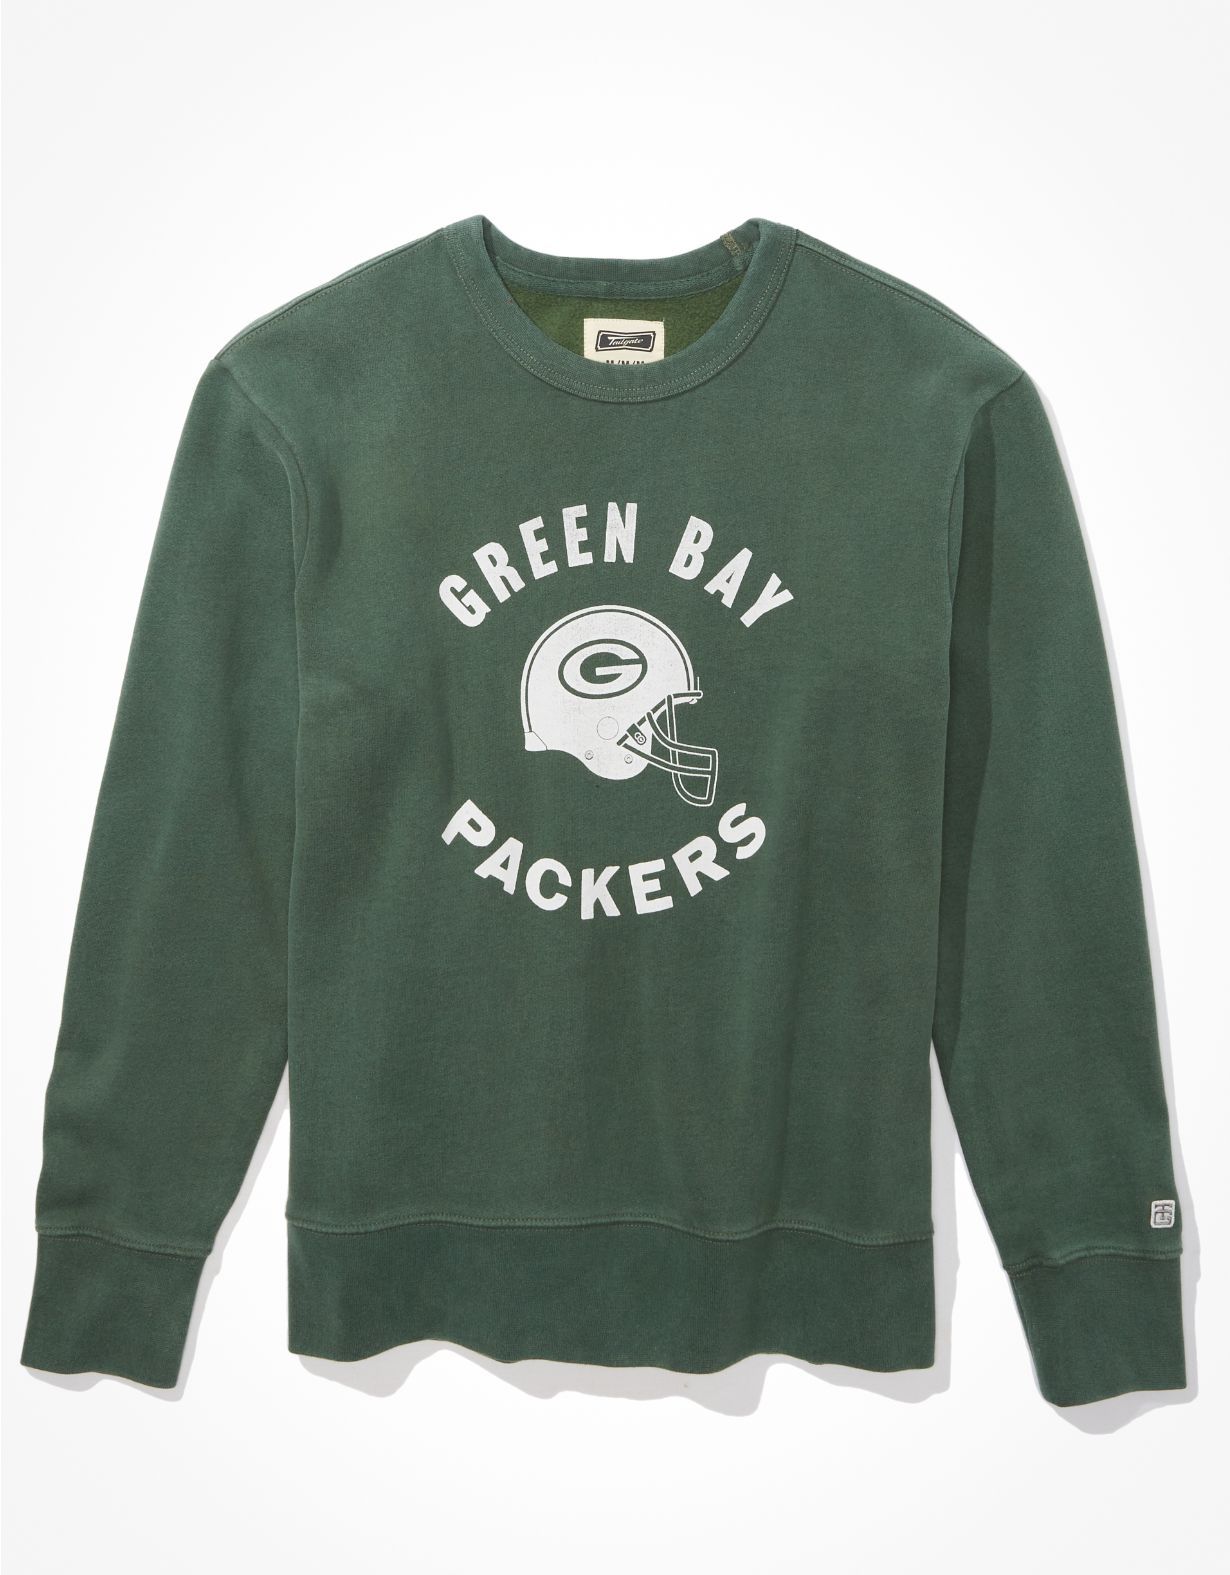 Tailgate Men's Green Bay Packers Graphic Fleece Sweatshirt | American Eagle Outfitters (US & CA)